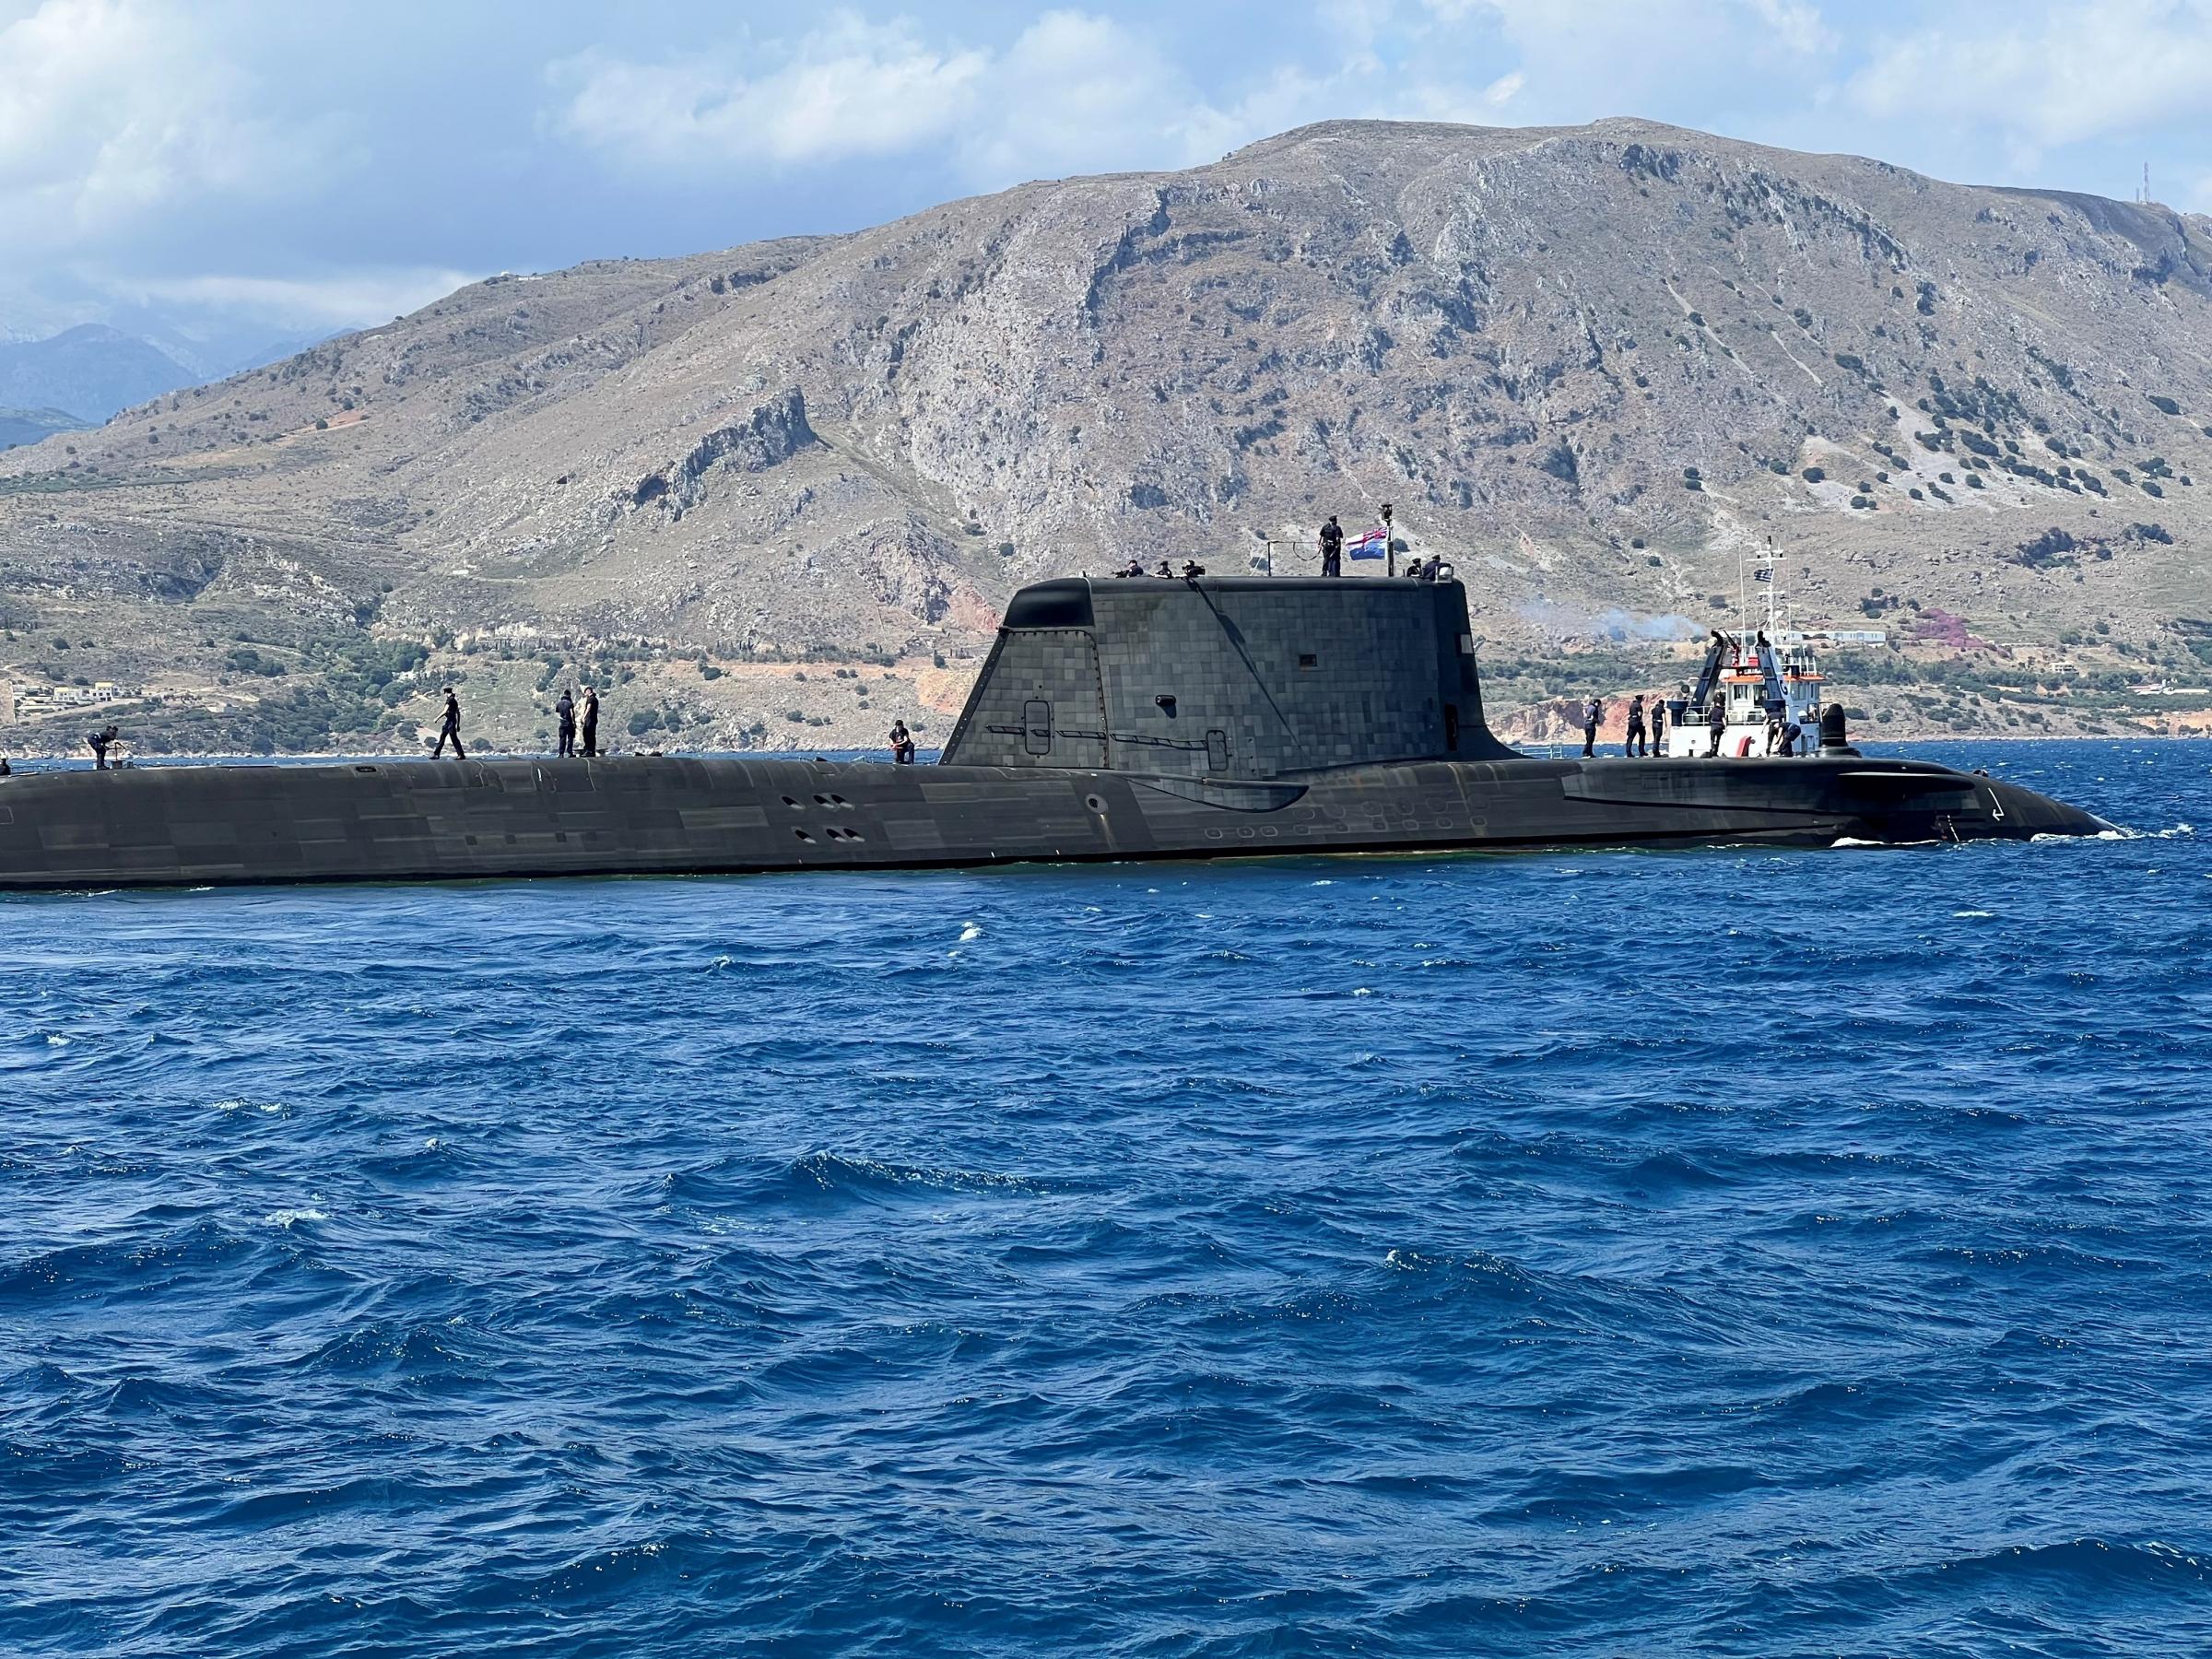 HMS Audacious departs Souda Bay in Crete ahead of NATO training and operations in the Mediterranean. The Astute-class submarine was on her first operational deployment from January 2022. Audacious can be seen flying the NATO pennant on her departure from